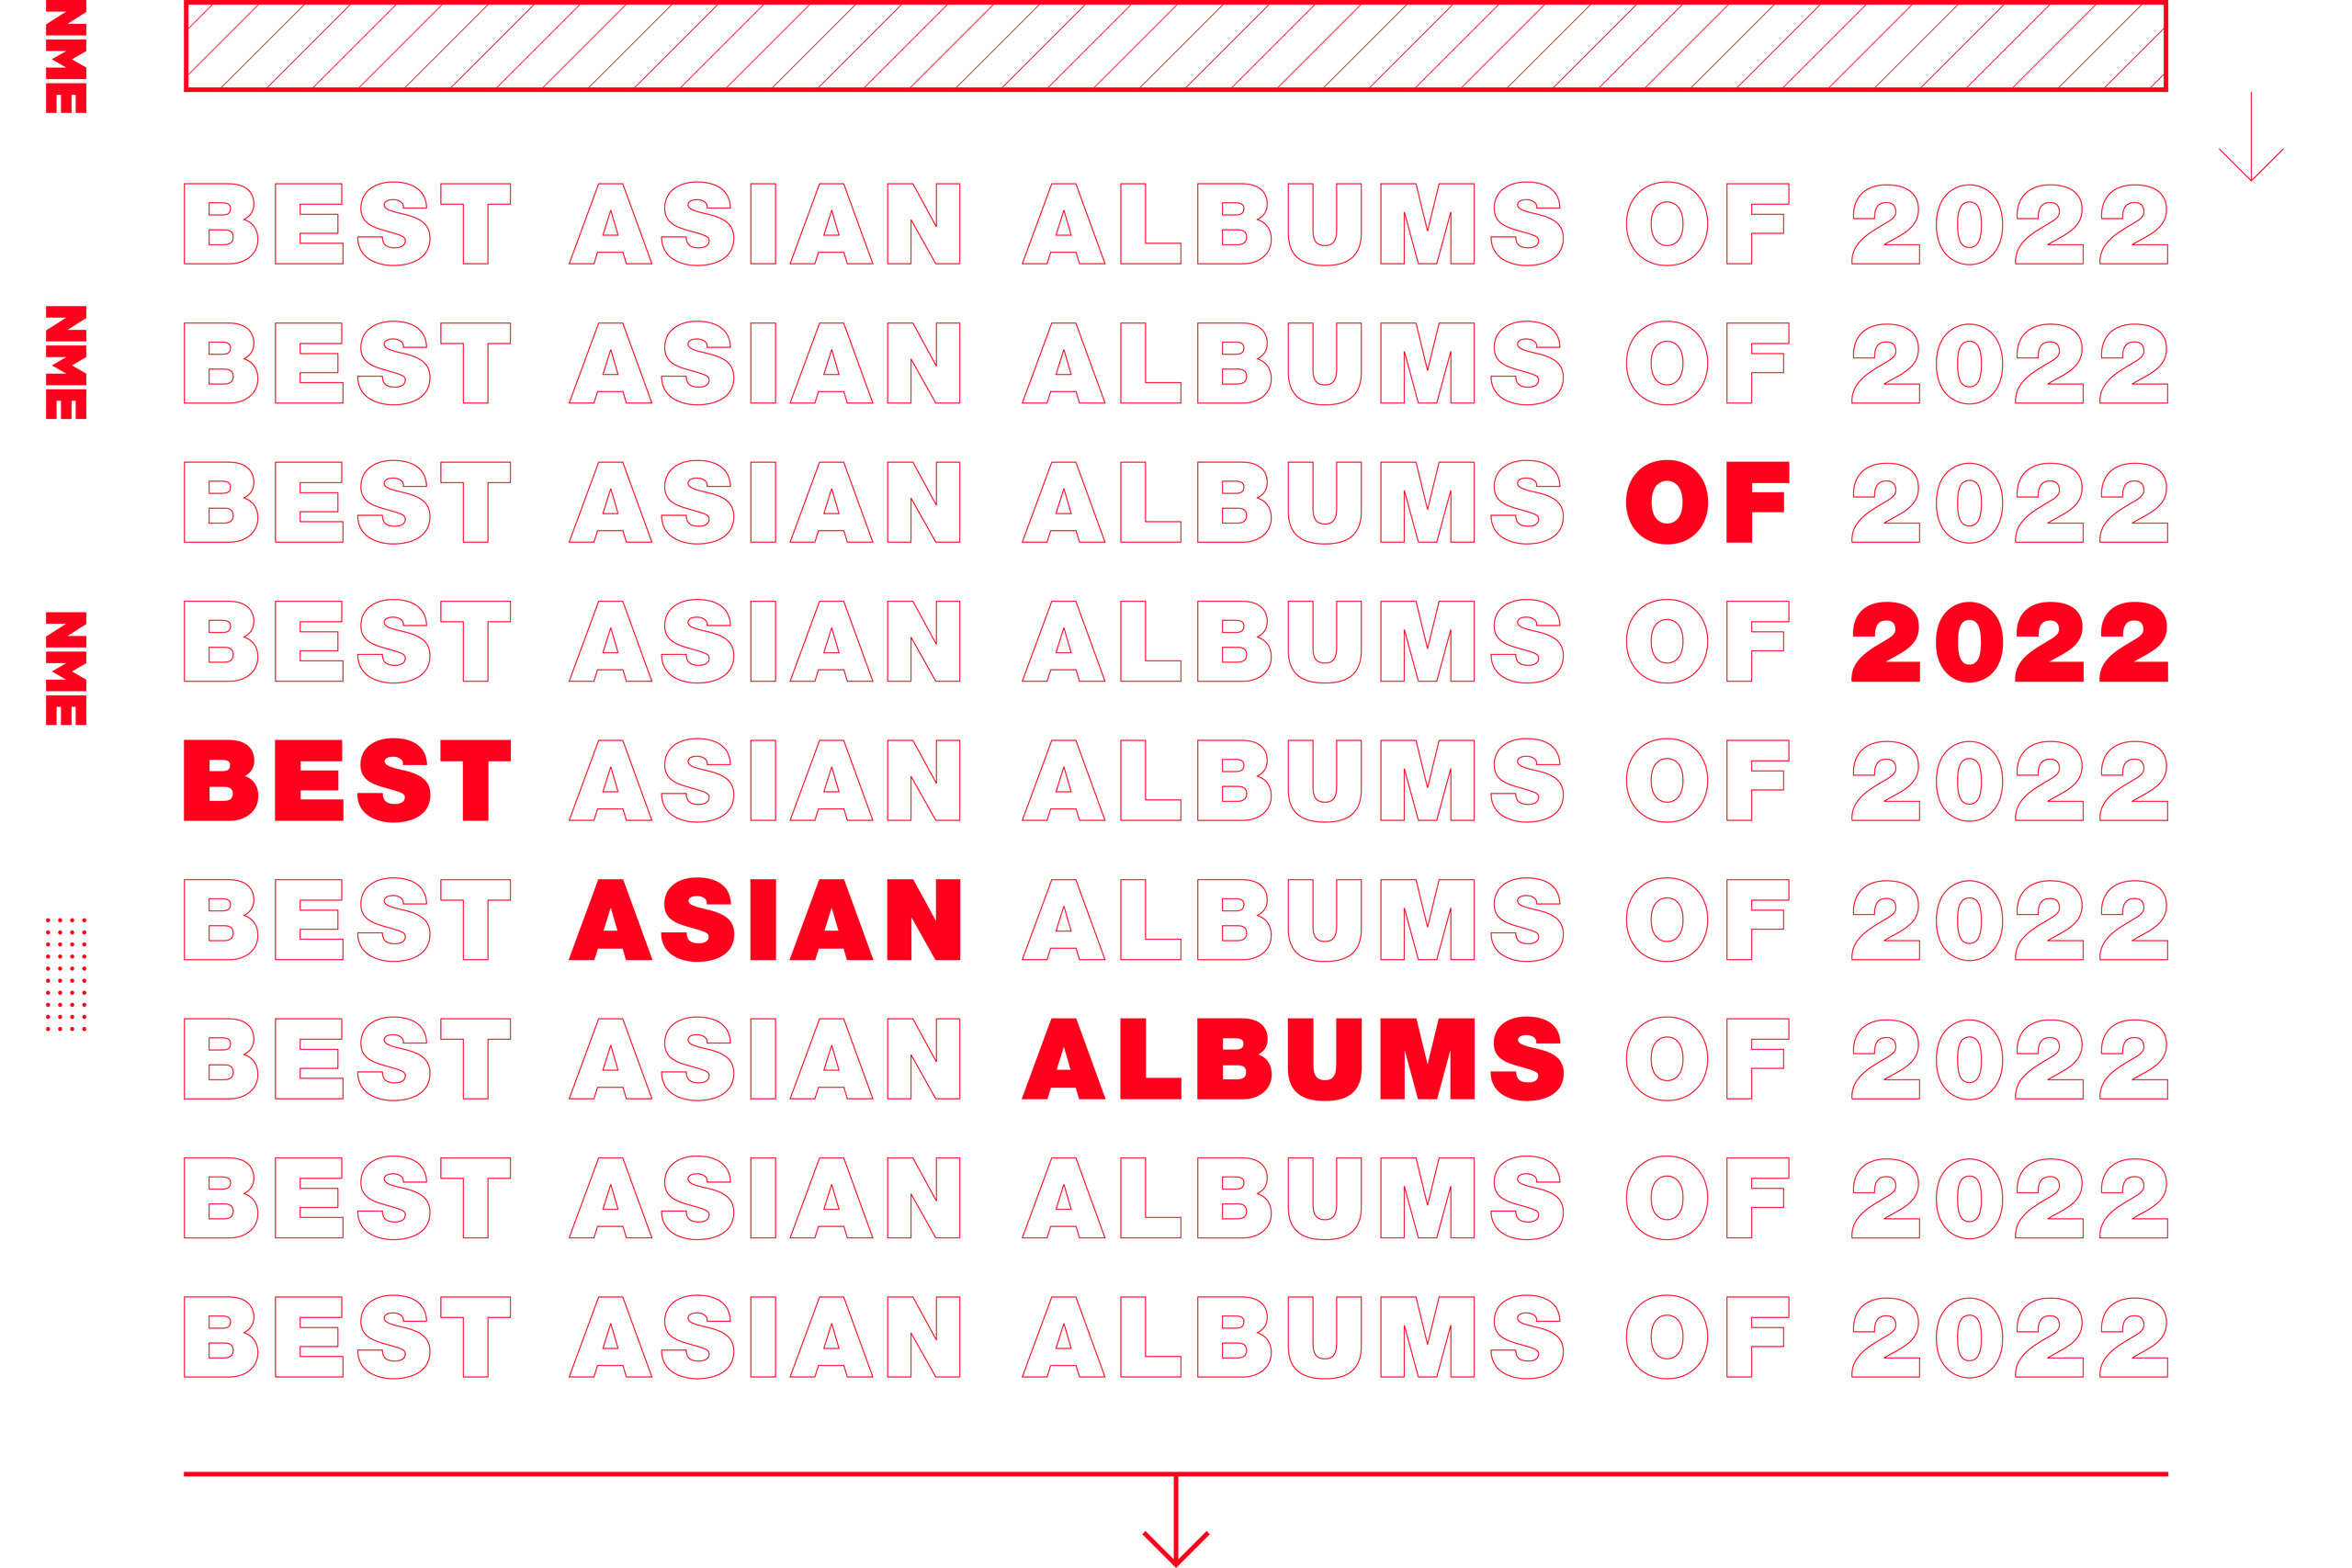 The 25 best Asian albums of 2022